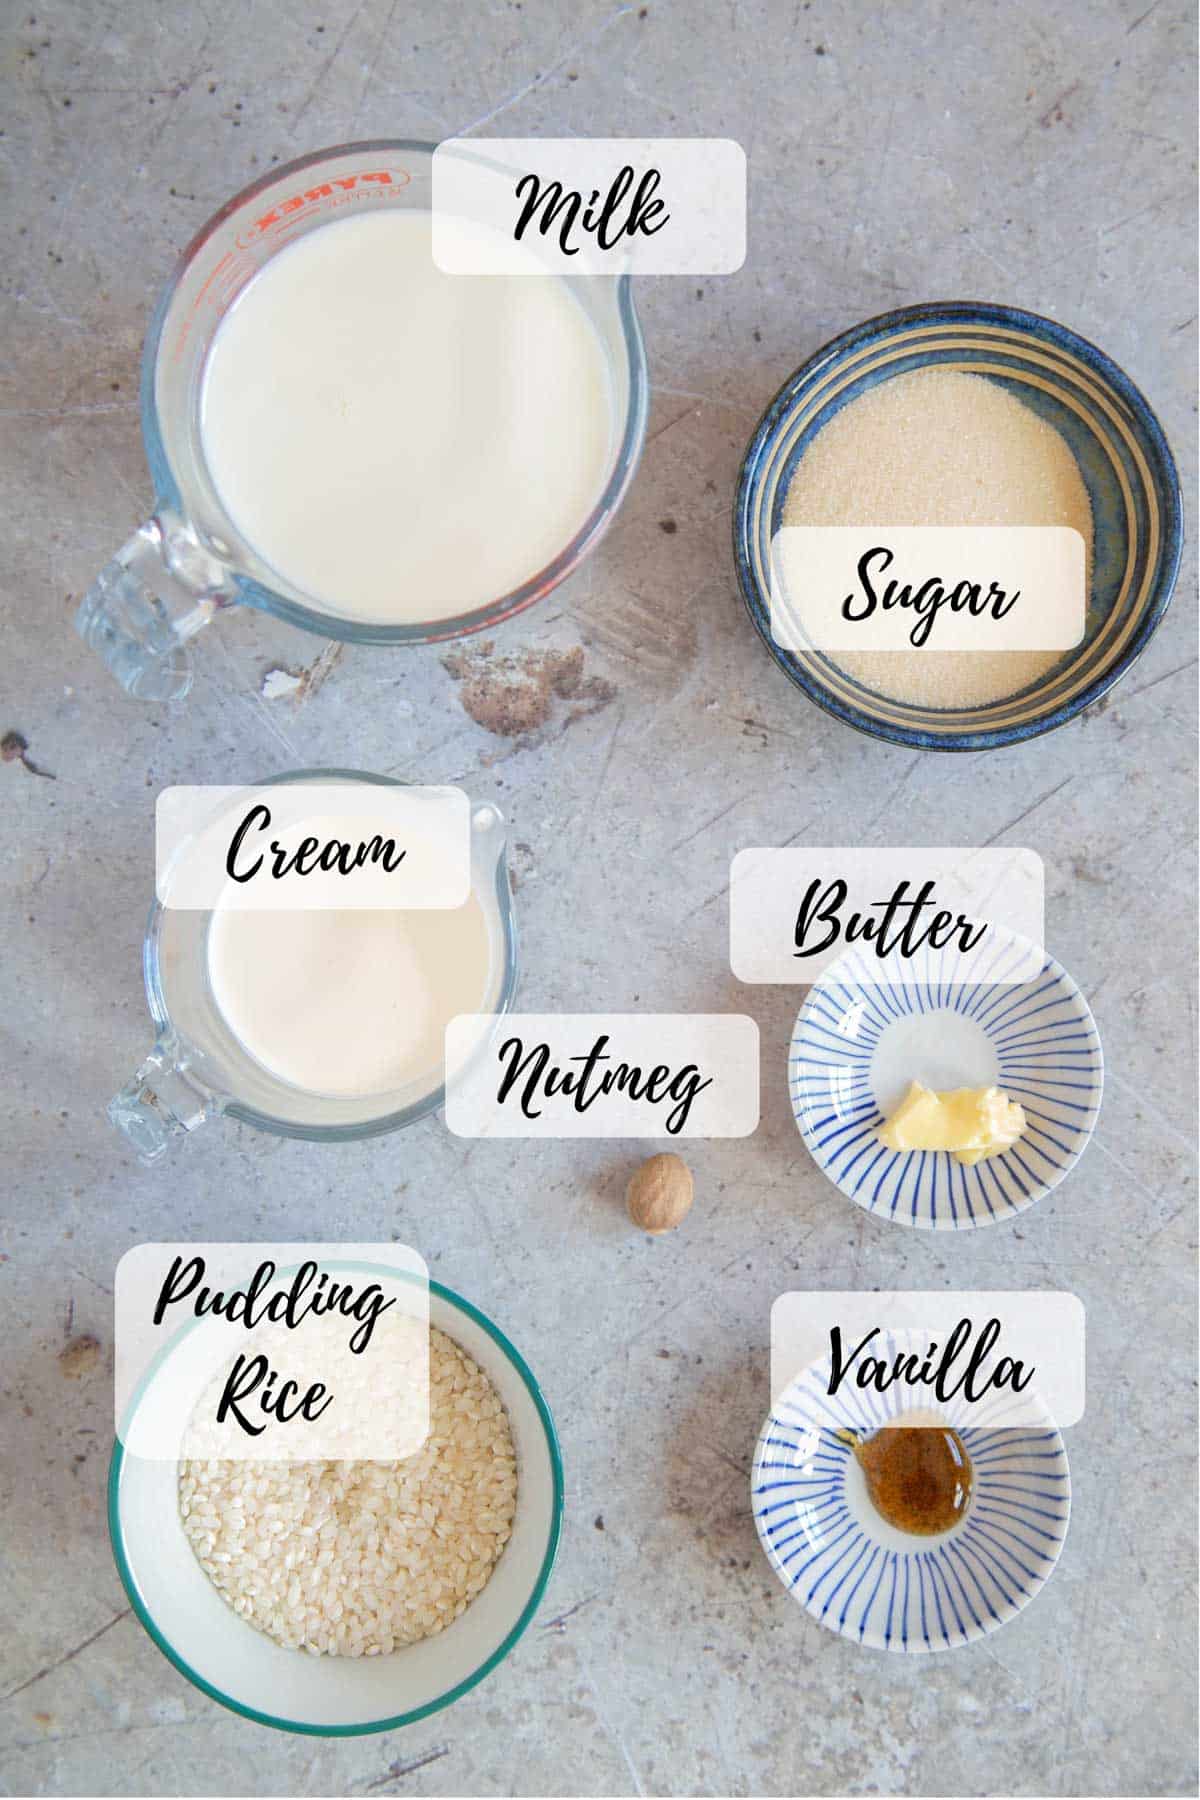 The ingredients for baked rice pudding - pudding, rice, milk, cream, sugar, butter, vanilla and nutmeg,